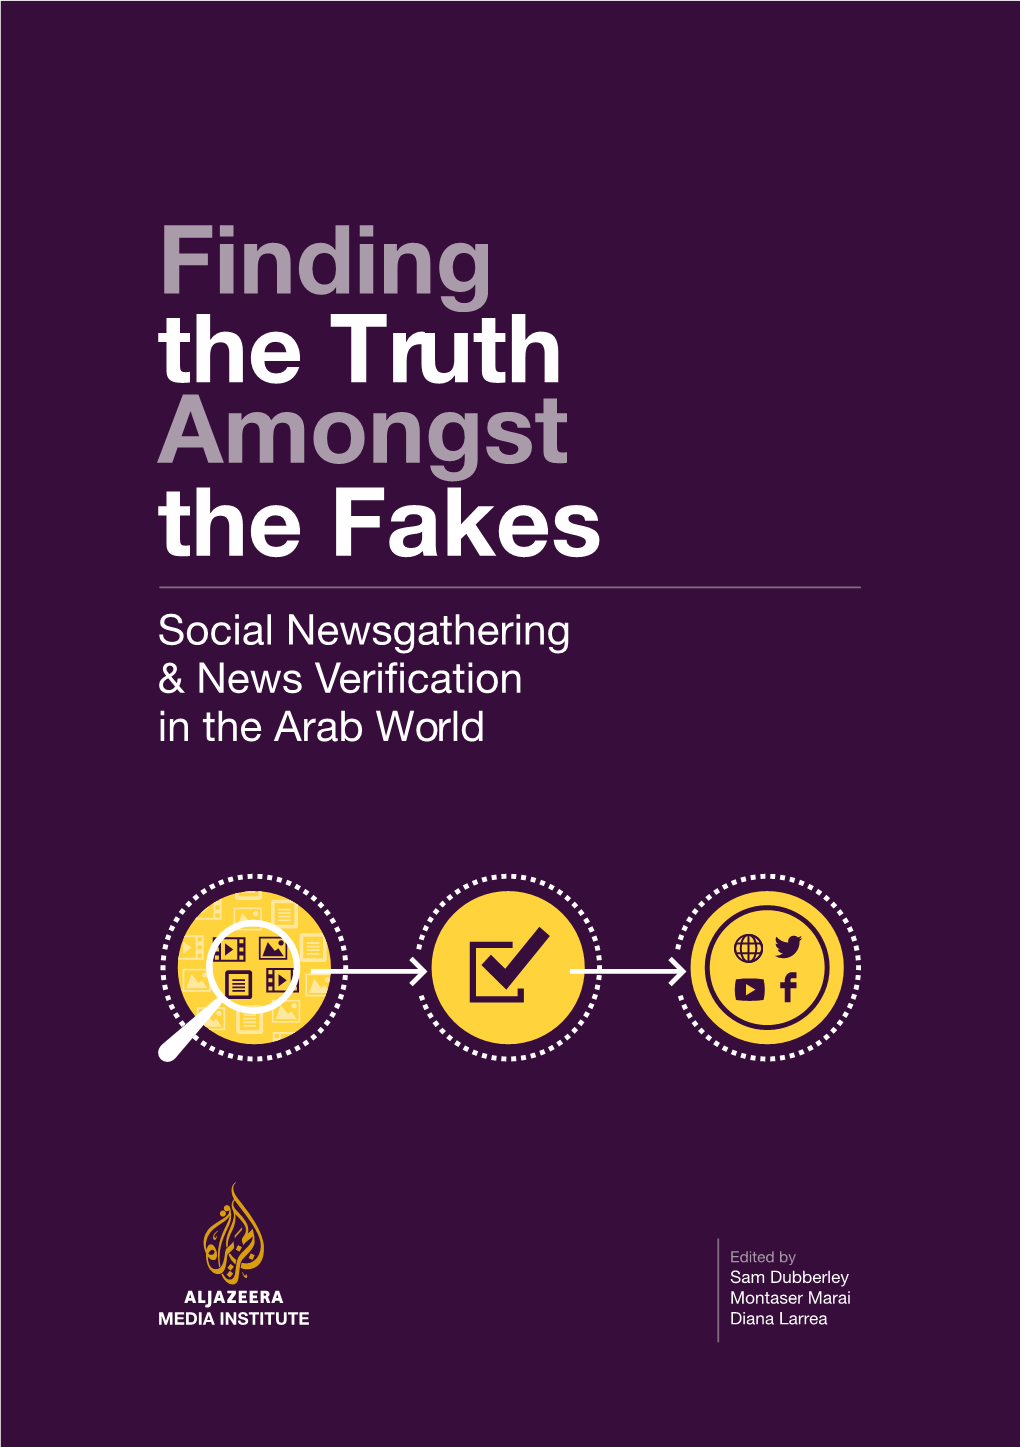 Finding the Truth Amongst the Fakes Social Newsgathering in the Arab World